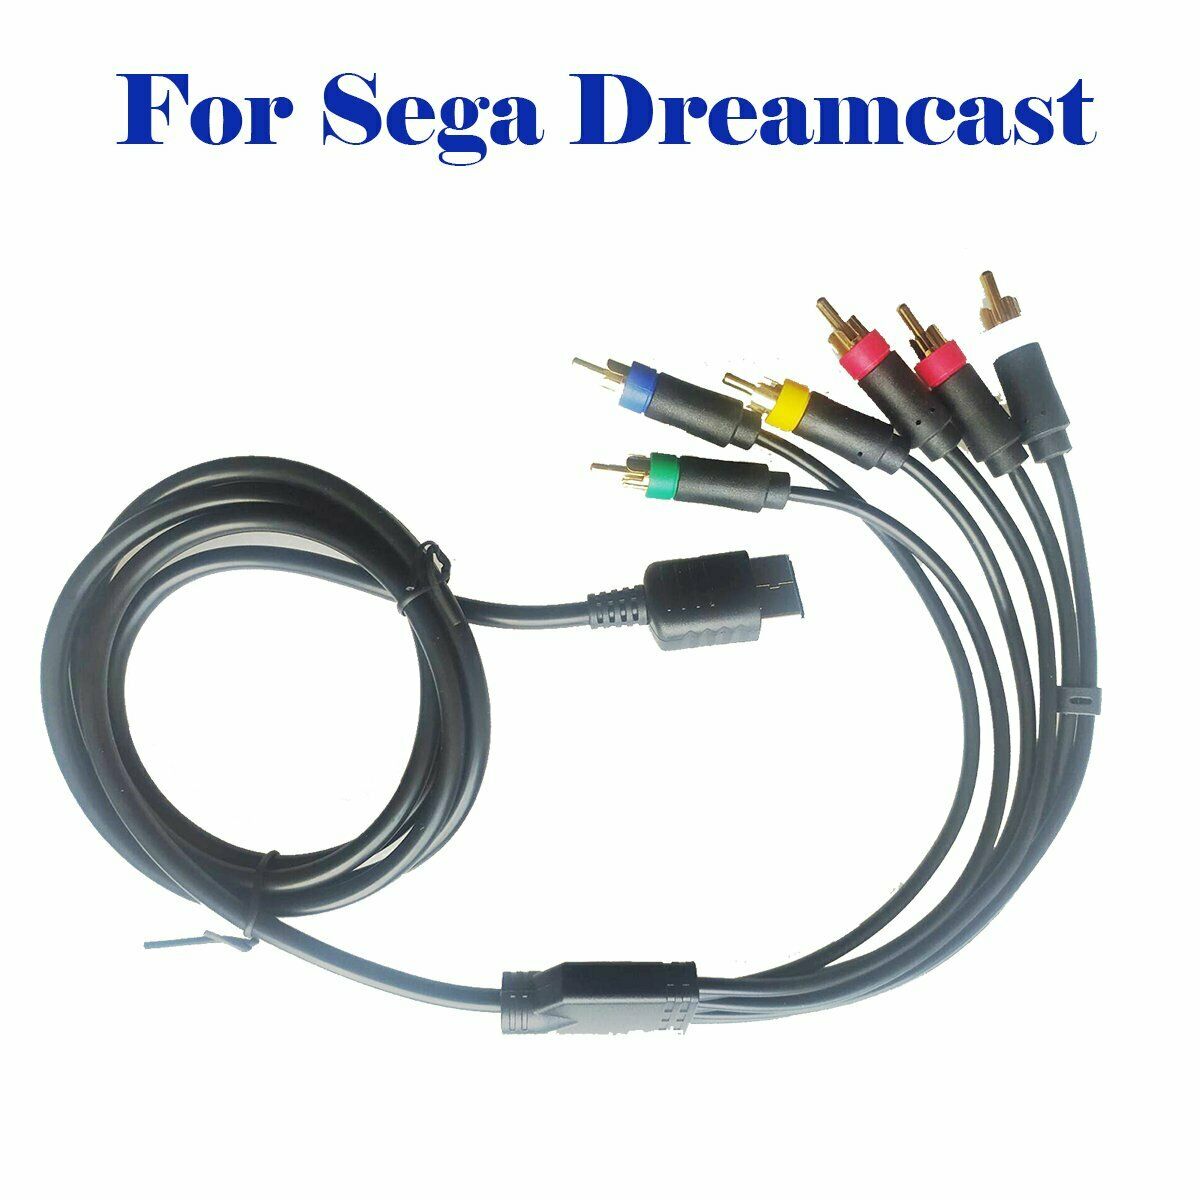 RGBS/RGB Color Monitor 128-Bit Audio Cable Adapter For Sega Dreamcast Console